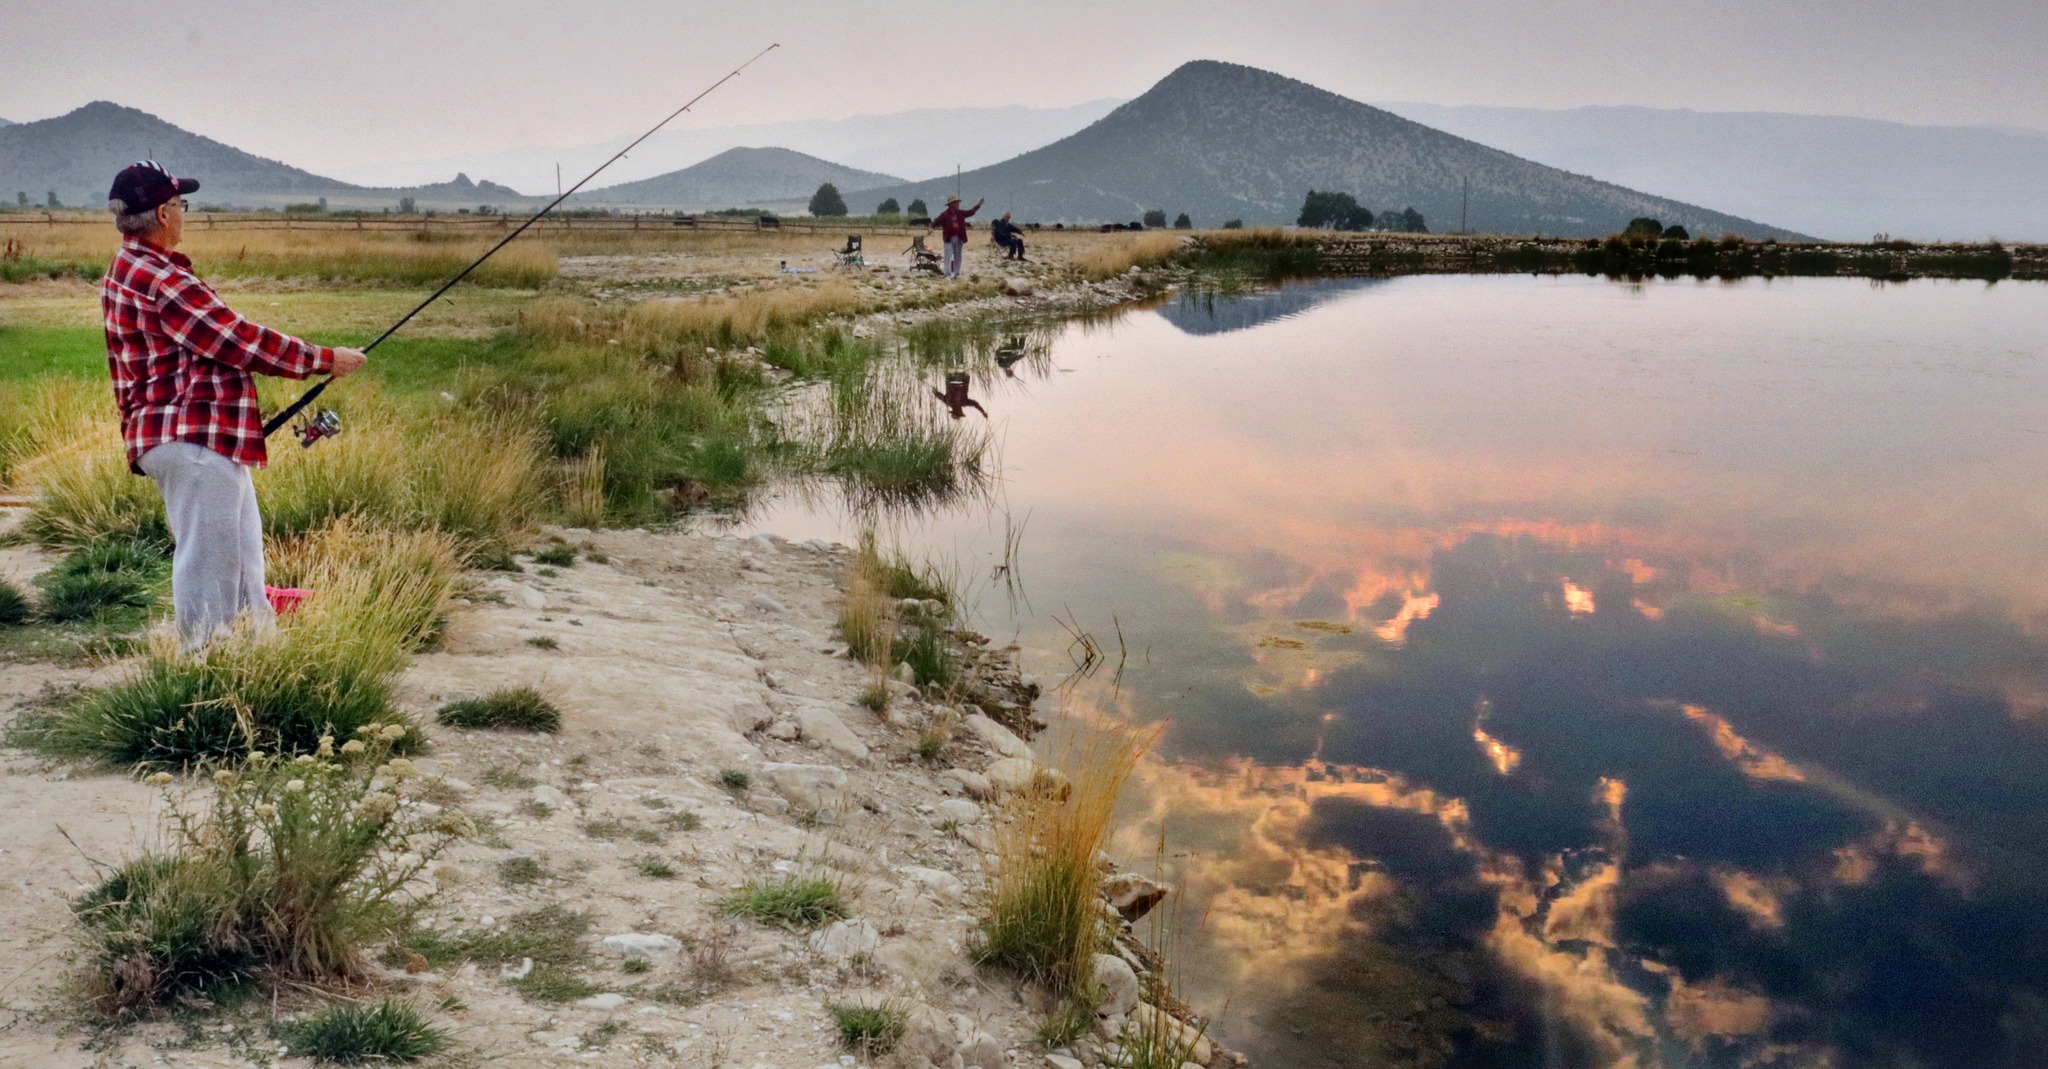 Man fishing on the shores of a pond, mountains in the background. Gentle sunset reflection on the pond